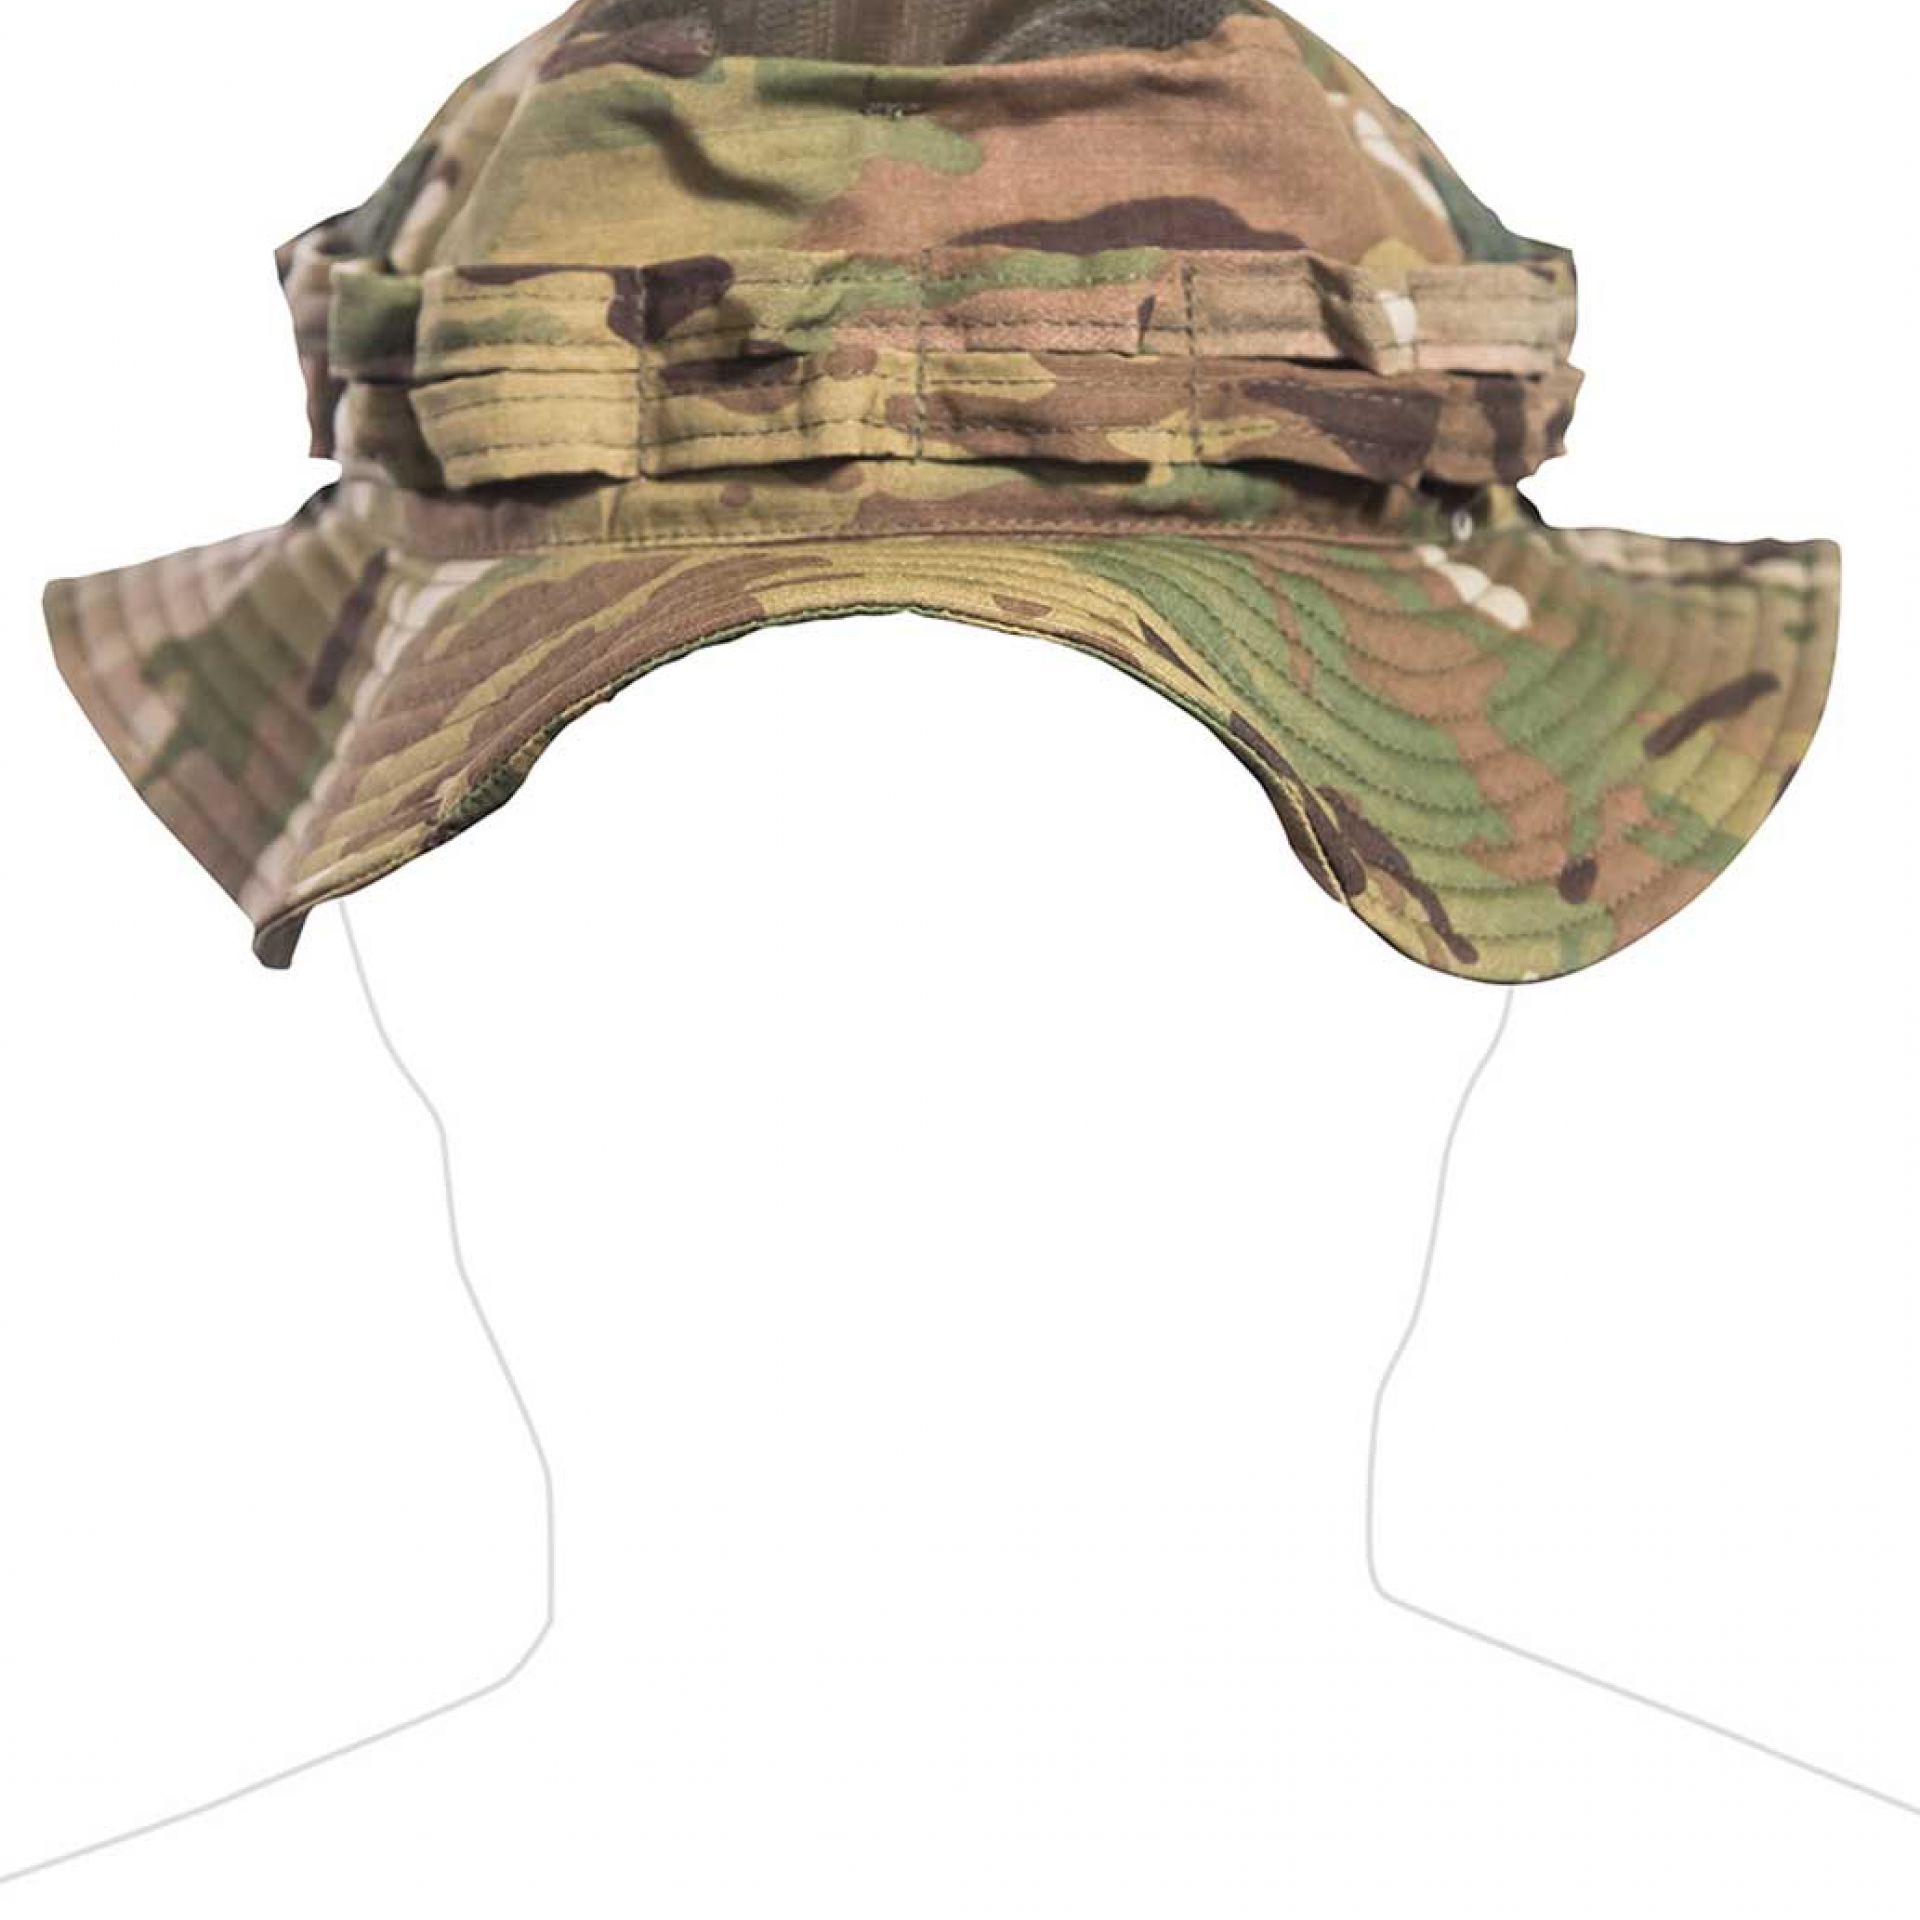 Boonie hat, Sun protection with mesh ventilation